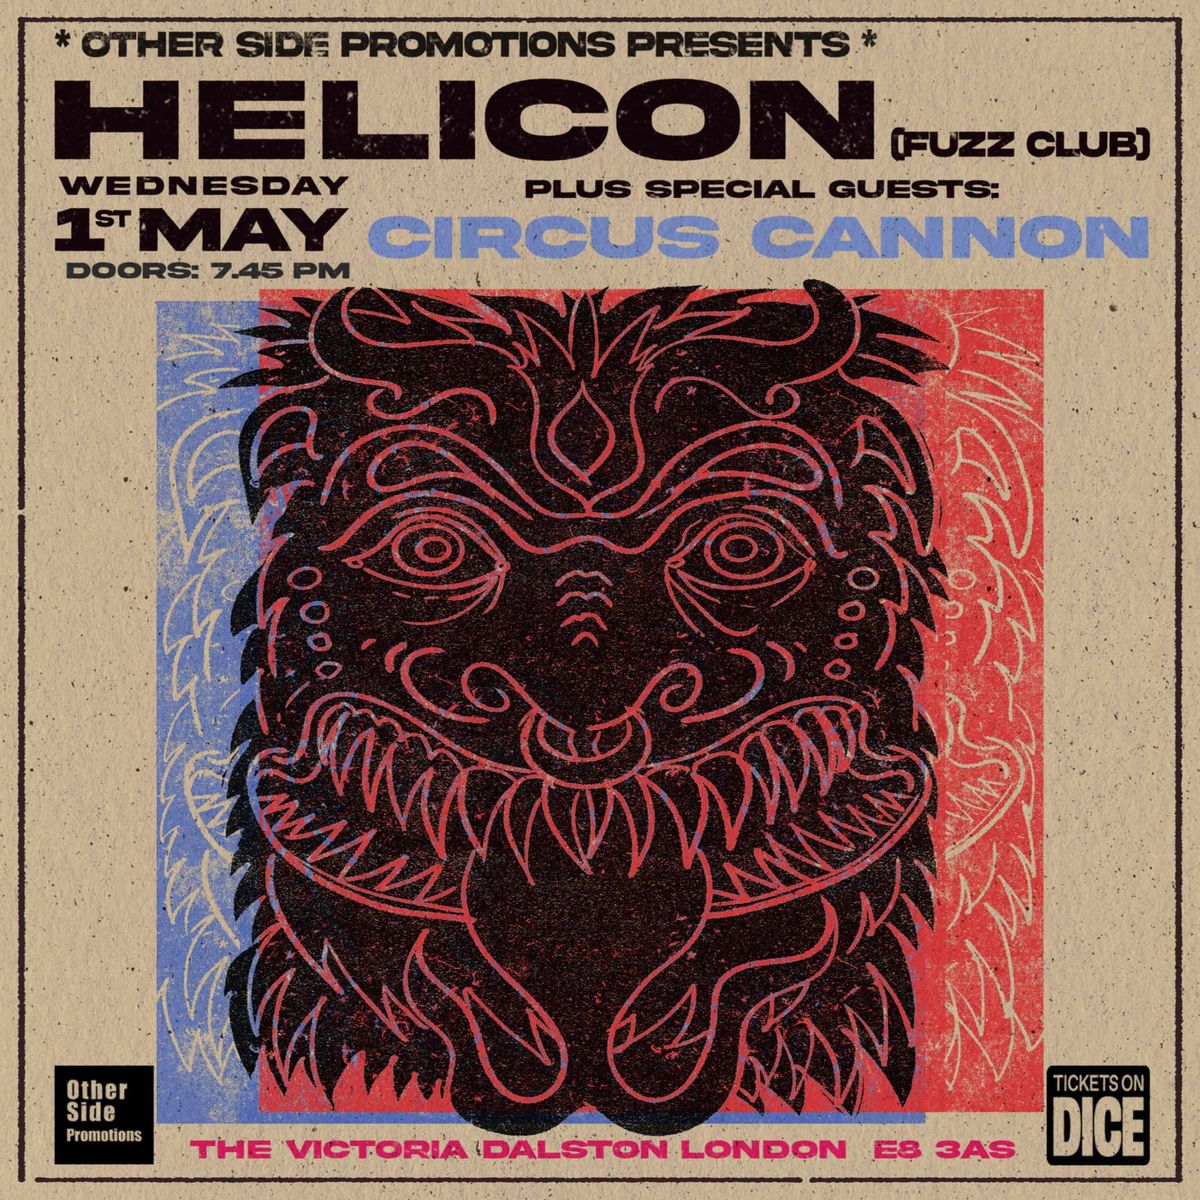 OSP Presents: Helicon (Fuzz Club) + Special Guests: Circus Cannon